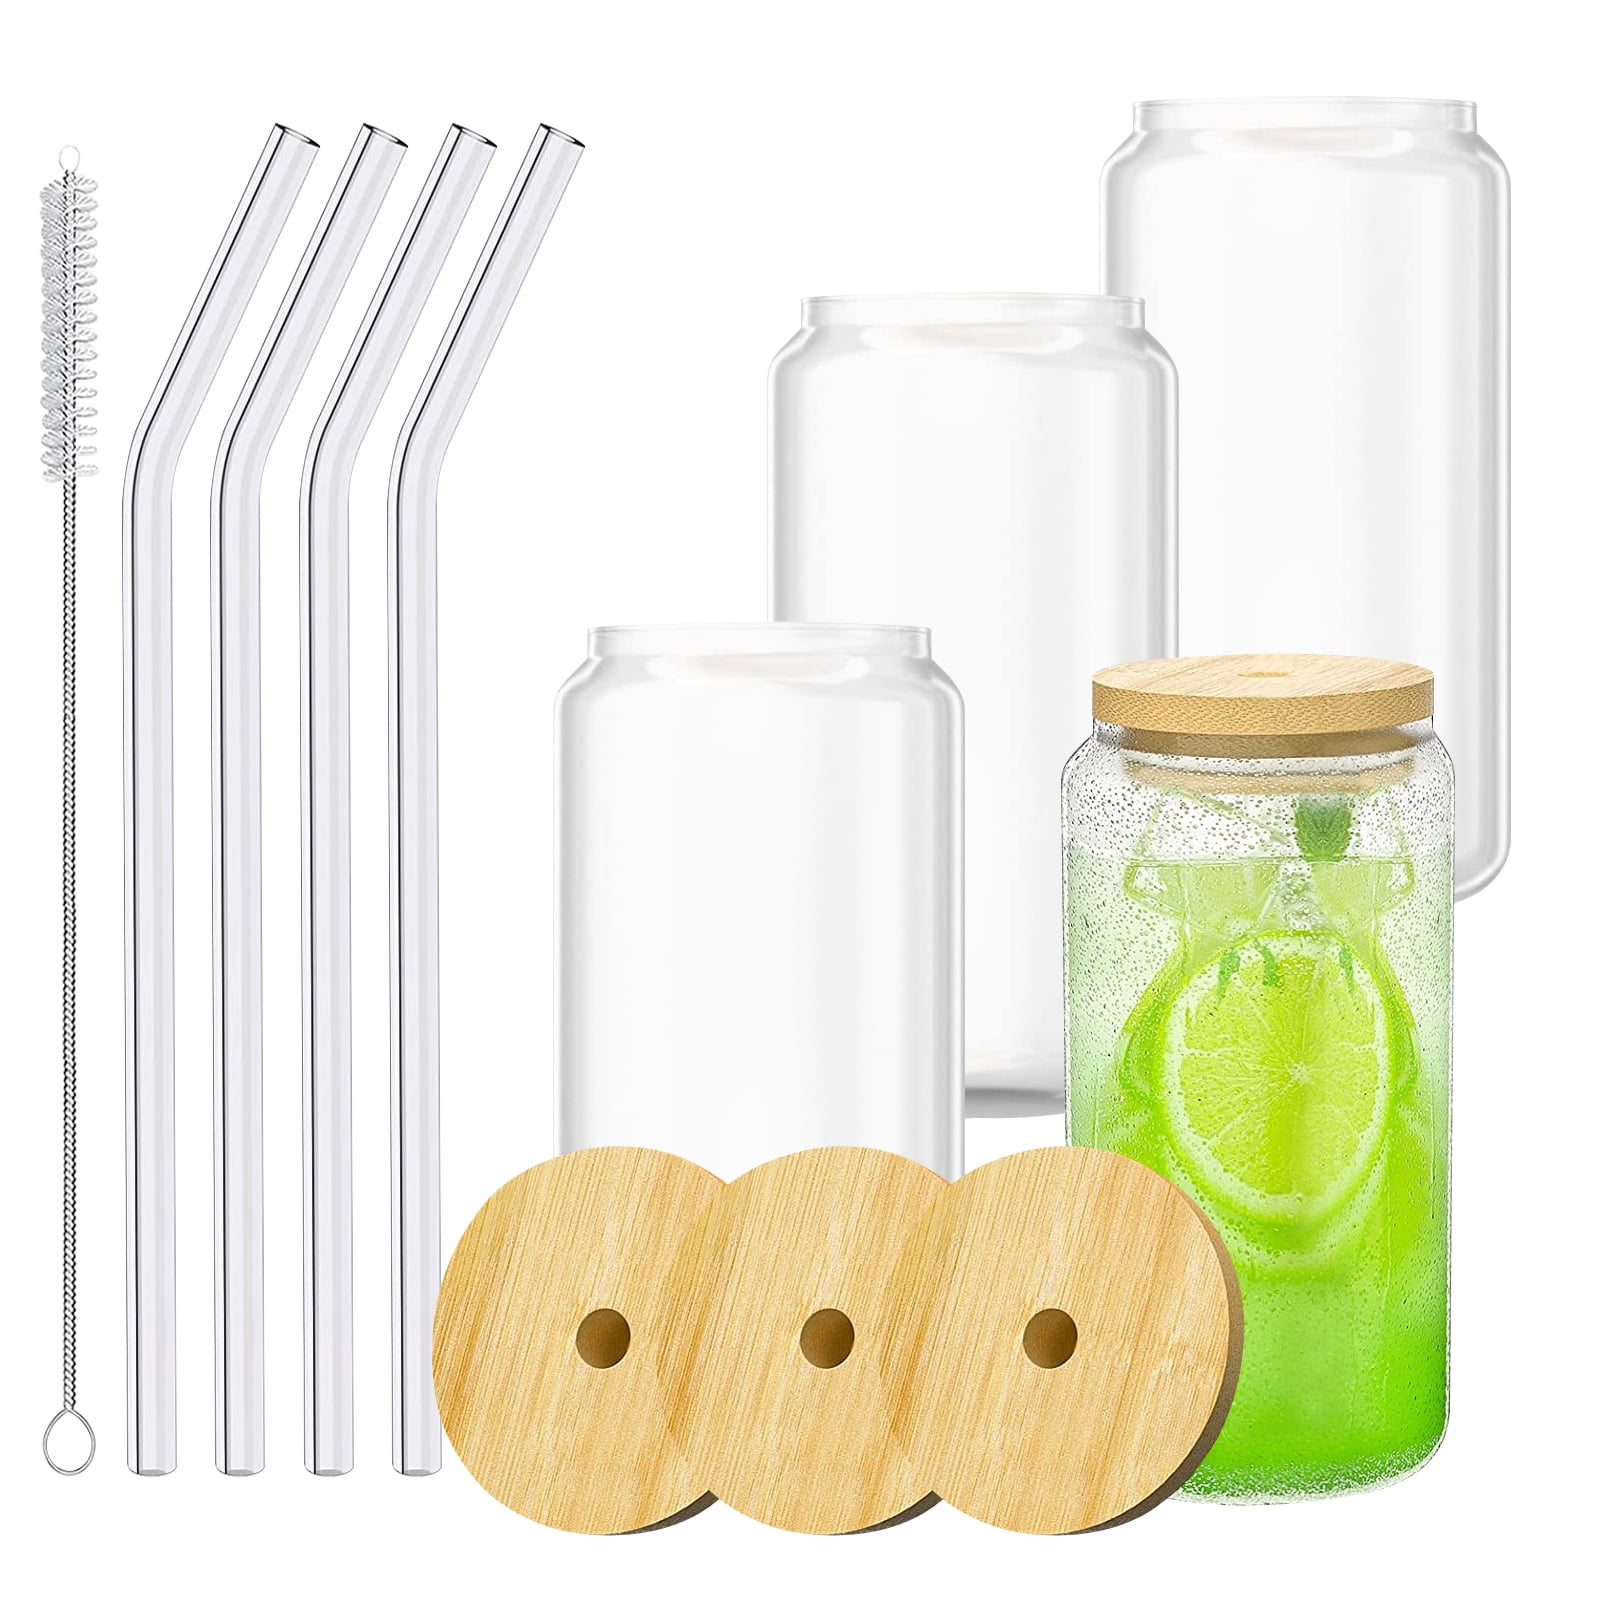 Vozoka Beer Glass Cups with Bamboo Lids and Glass Straw, 6 Set 16 oz Ice Coffee Glasses, Tumbler Glass Cup, Drinking Glasses Set for Coffee Whiskey